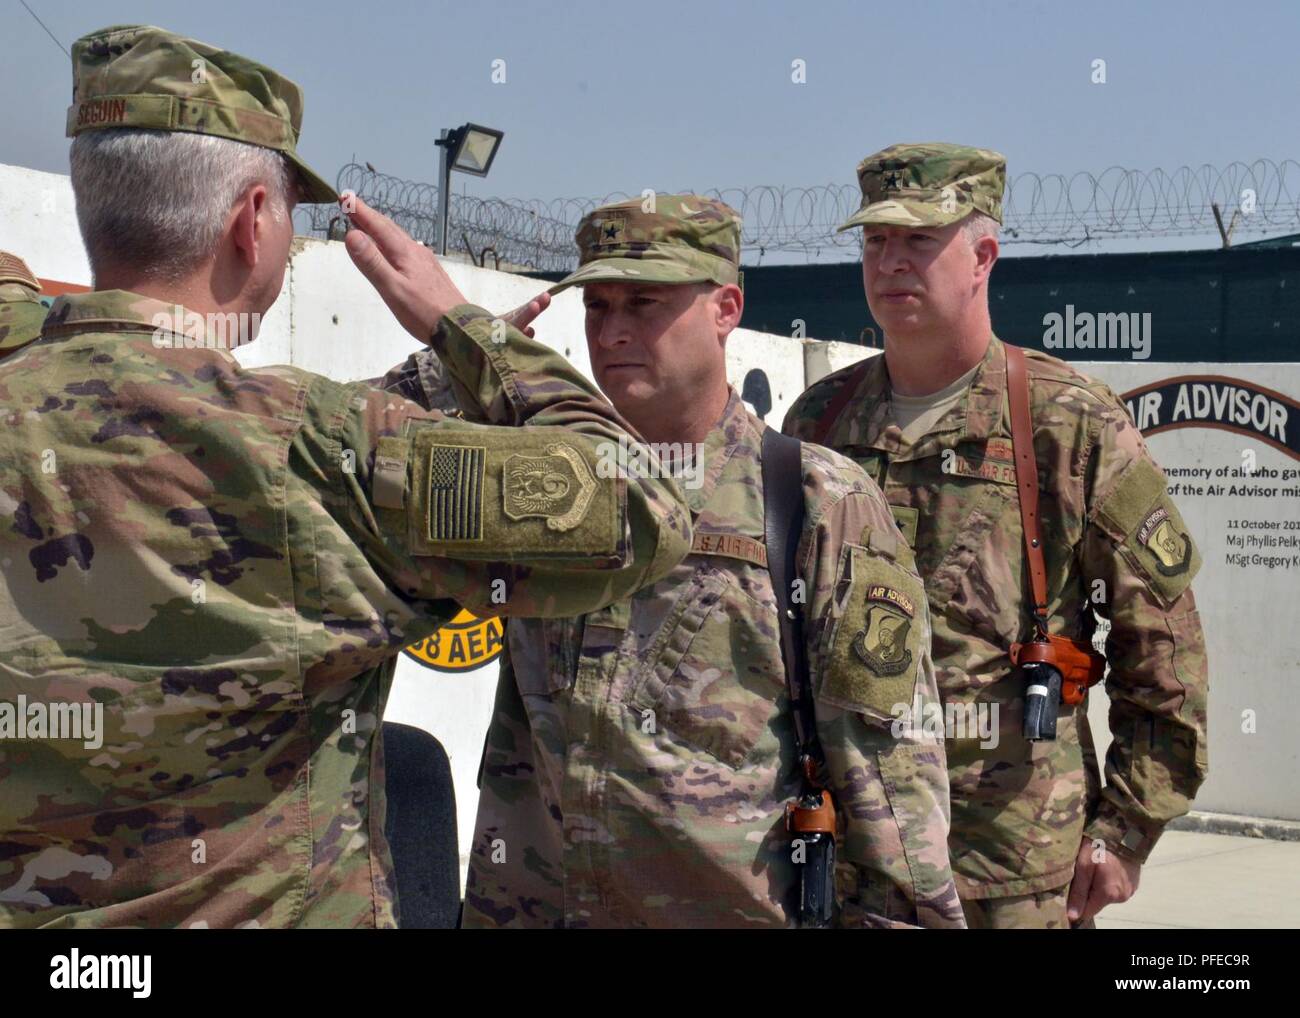 KABUL, Afghanistan (June 4, 2016) – U.S. Air Force Brig. Gen. Phillip Stewart, Train, Advise and Assist Command-Air and 438th Air Expeditionary Wing commander, renders a final salute to U.S. Air Force Maj. Gen. Barre Seguin, NATO Air Command Afghanistan and 9th Air and Space Expeditionary Task Force-Afghanistan commander, before relinquishing command June 4, 2018, Kabul, Afghanistan. Stewart relinquished command to U.S. Air Force Brig. Gen. Joel Carey, inbound Train, Advise, and Assist Command-Air and 438th Air Expeditionary Wing commander. Stock Photo